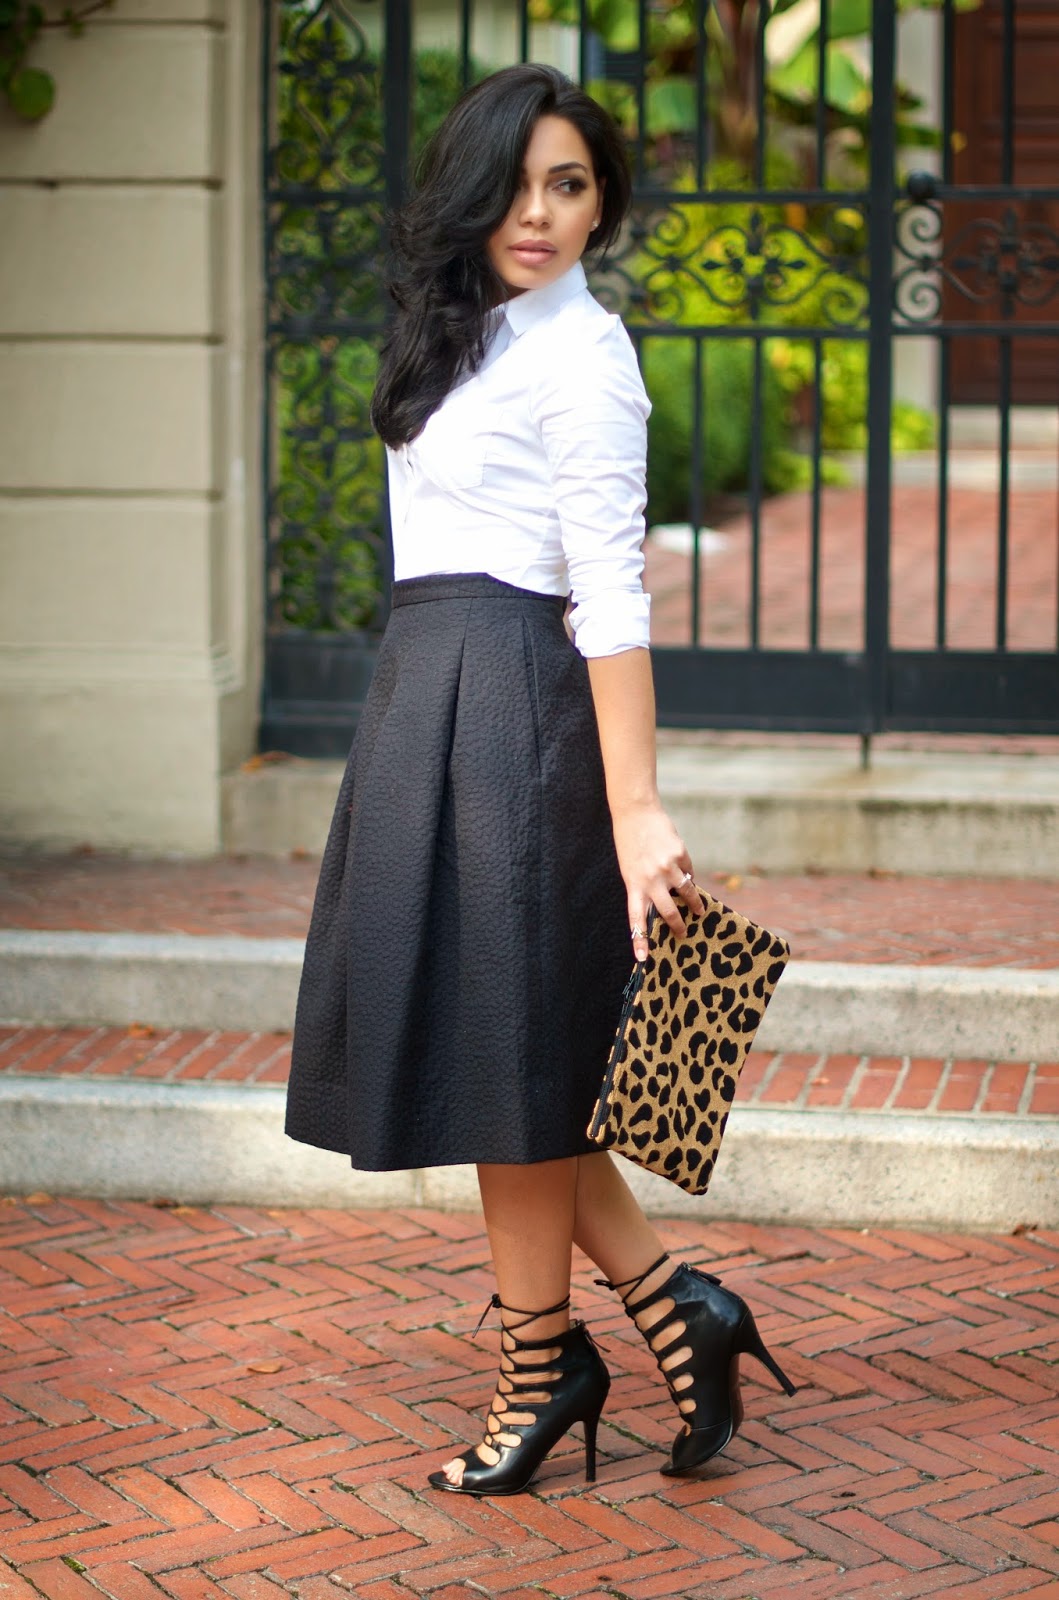 Classic Look featuring Midi Skirt | The Style Brunch